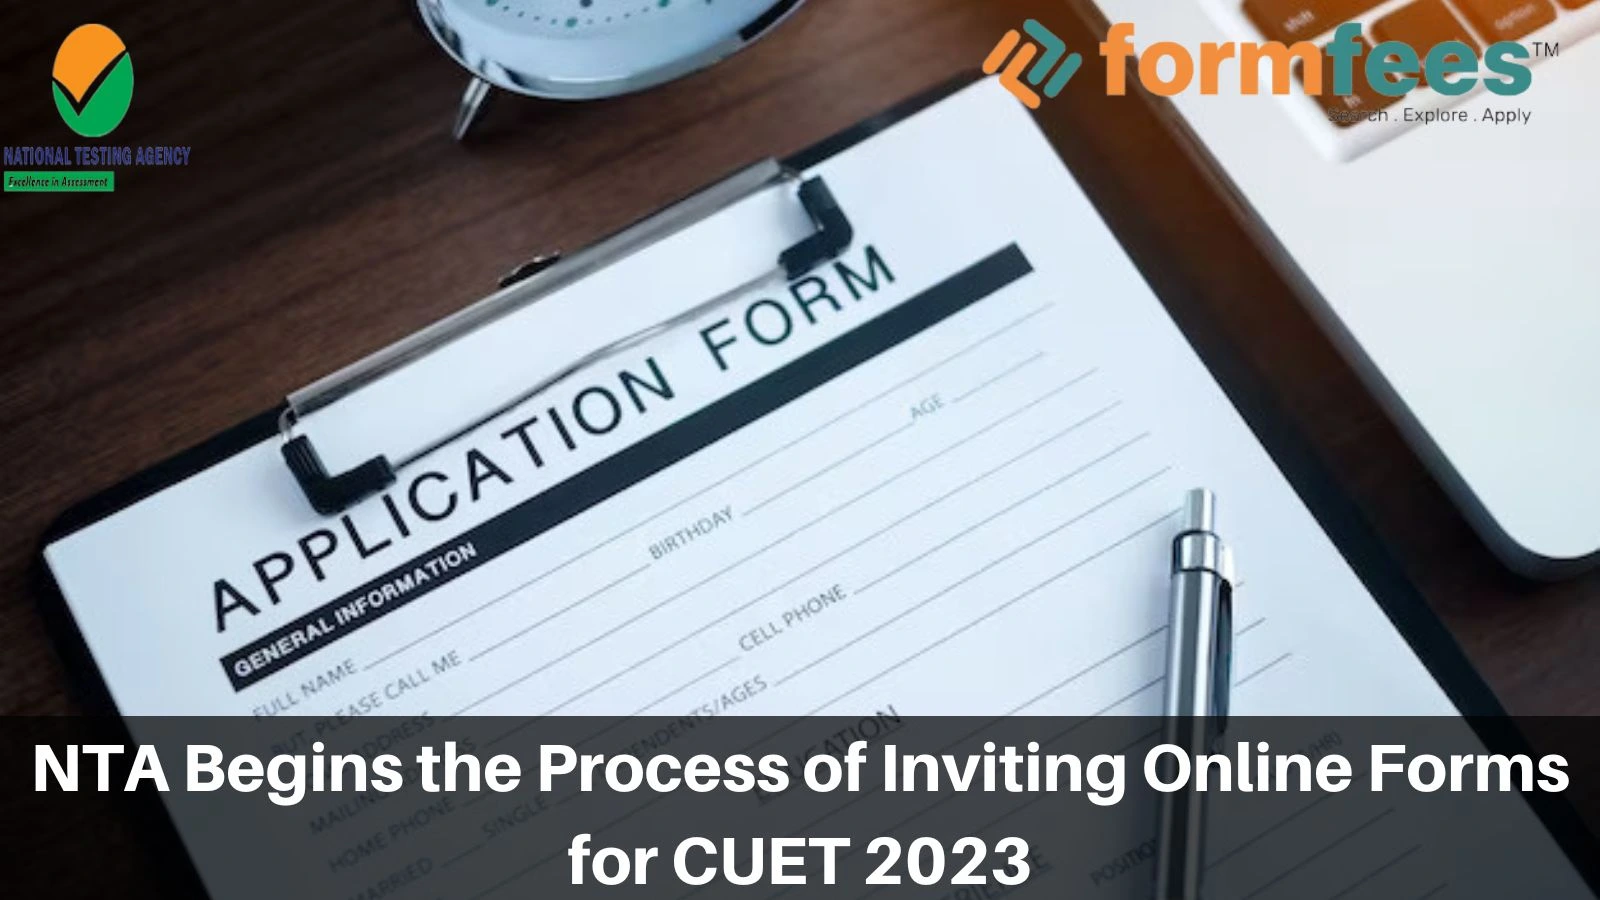 NTA Begins the Process of Inviting Online Forms for CUET 2023